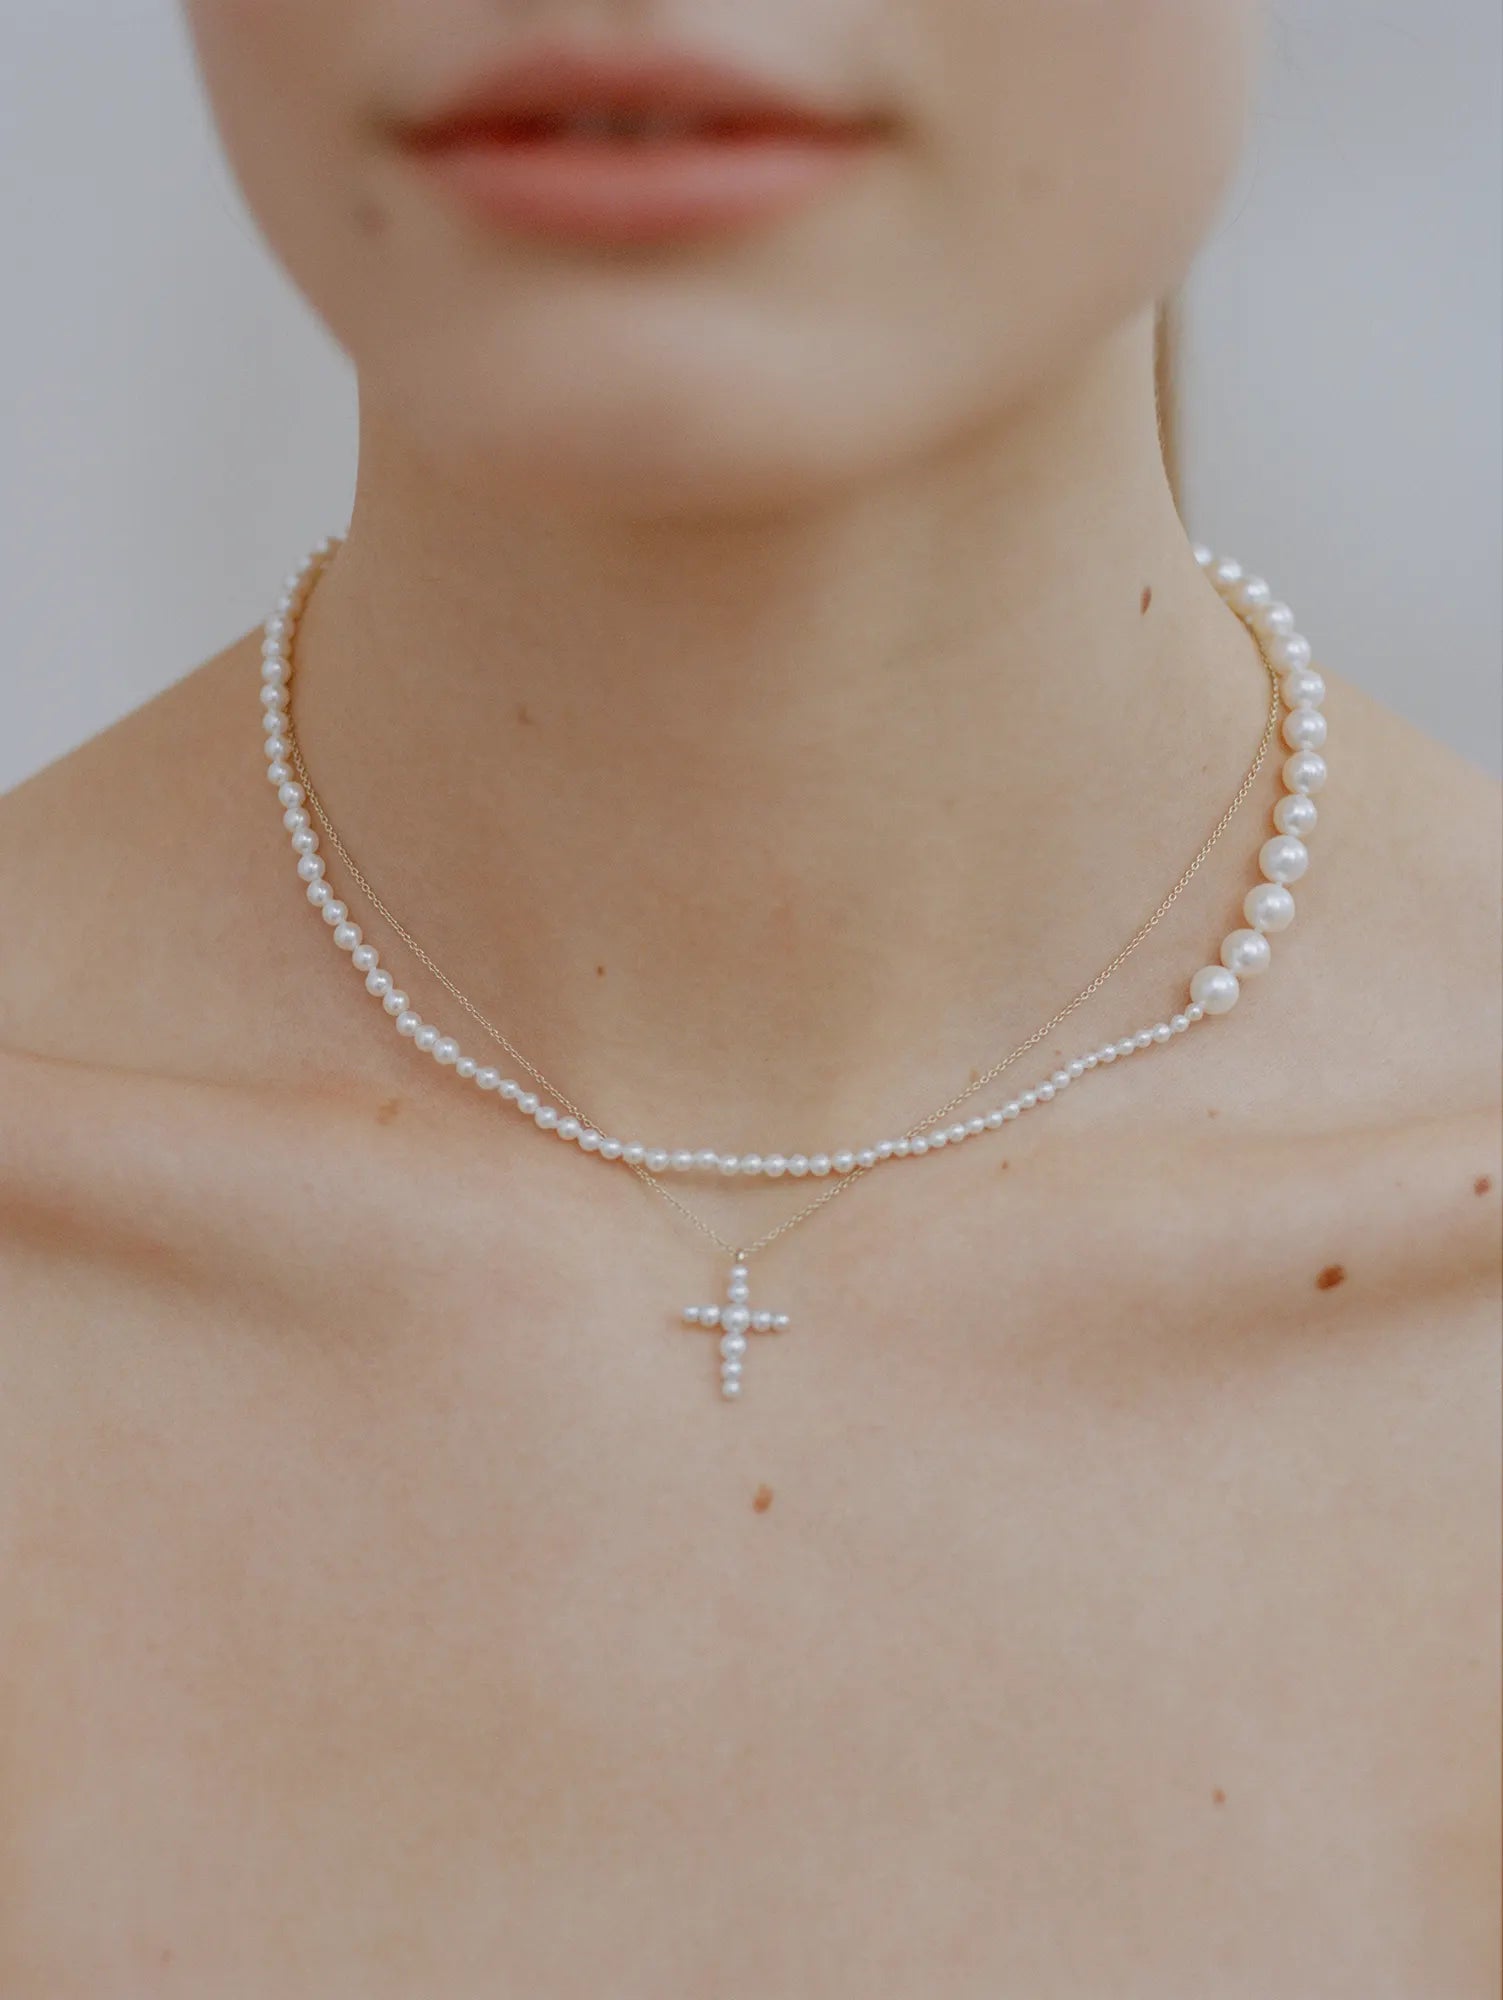 Model wearing two pearl necklaces, Peggy Deux and Petite Fellini Croix